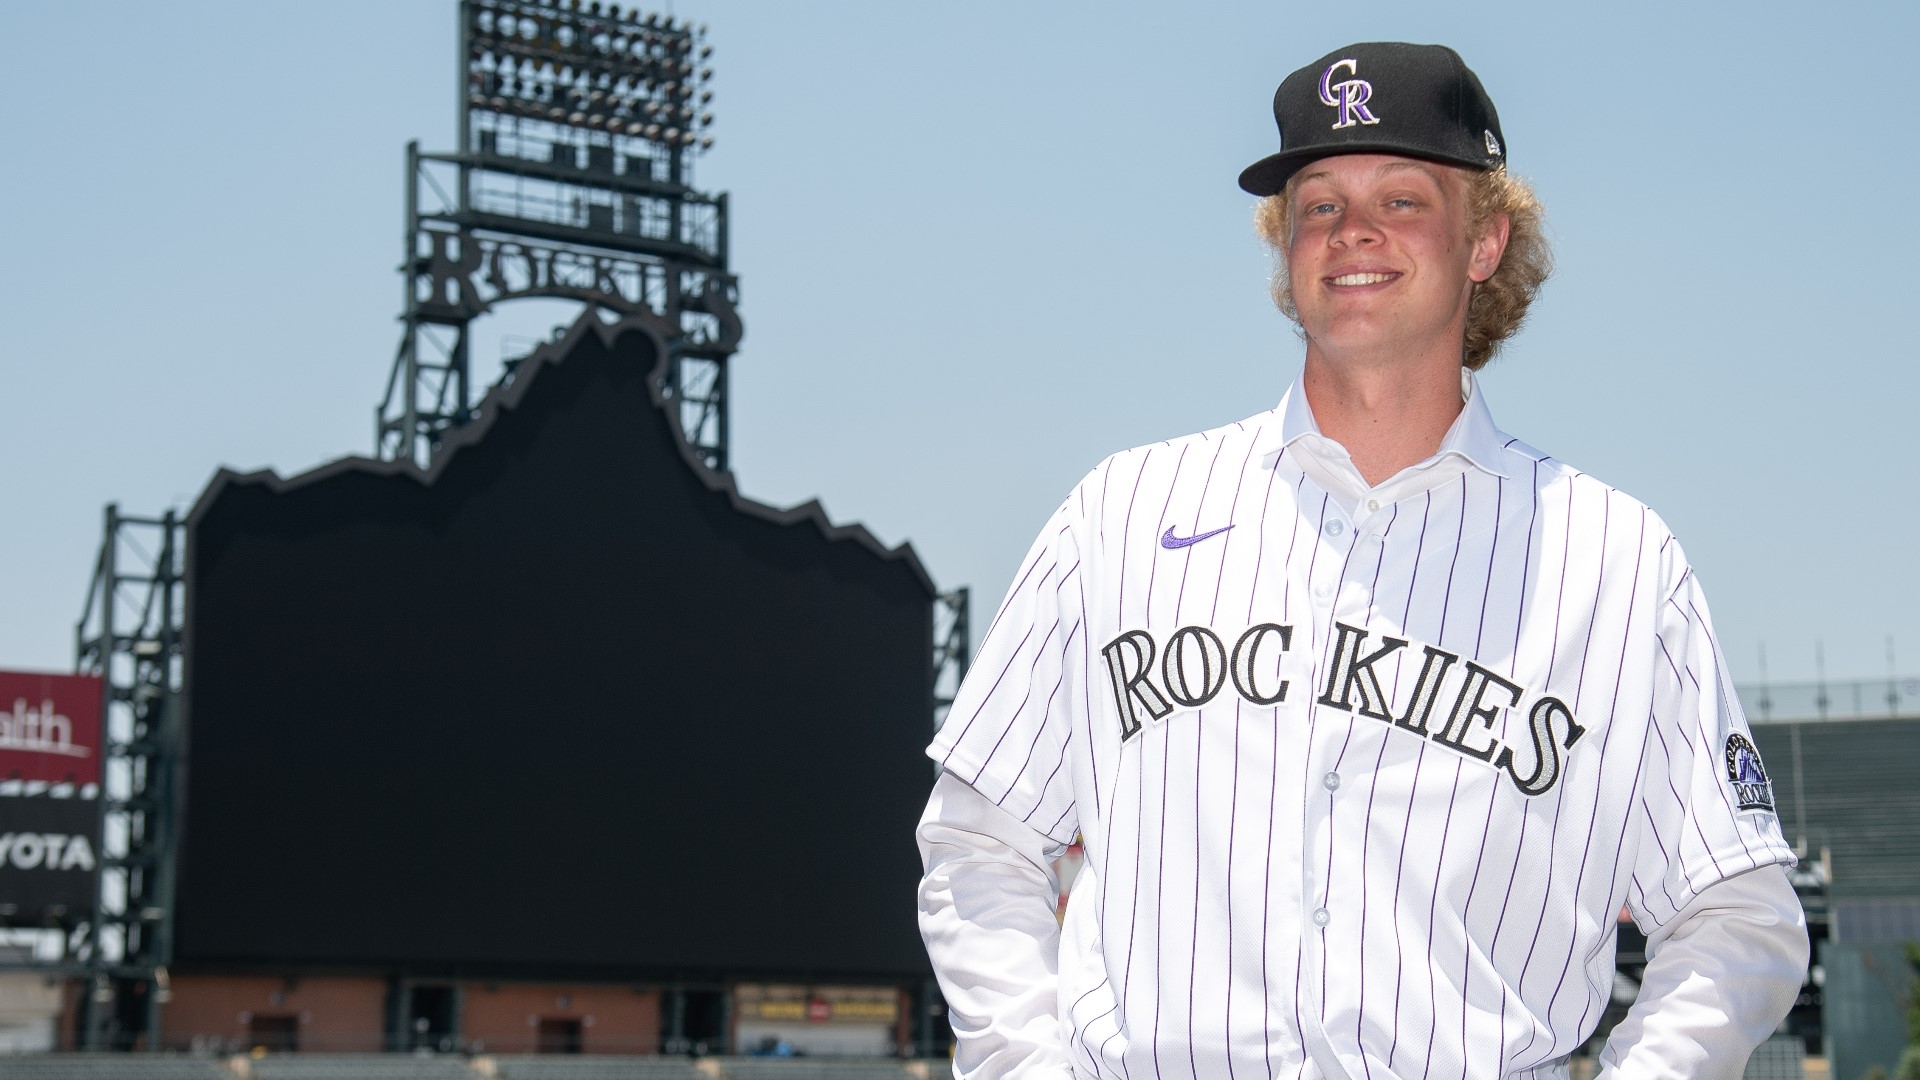 Douglas County pitcher Case Williams was drafted by his hometown team in the fourth round of the MLB draft. It was a dream come true for the life-long Rockies fan.